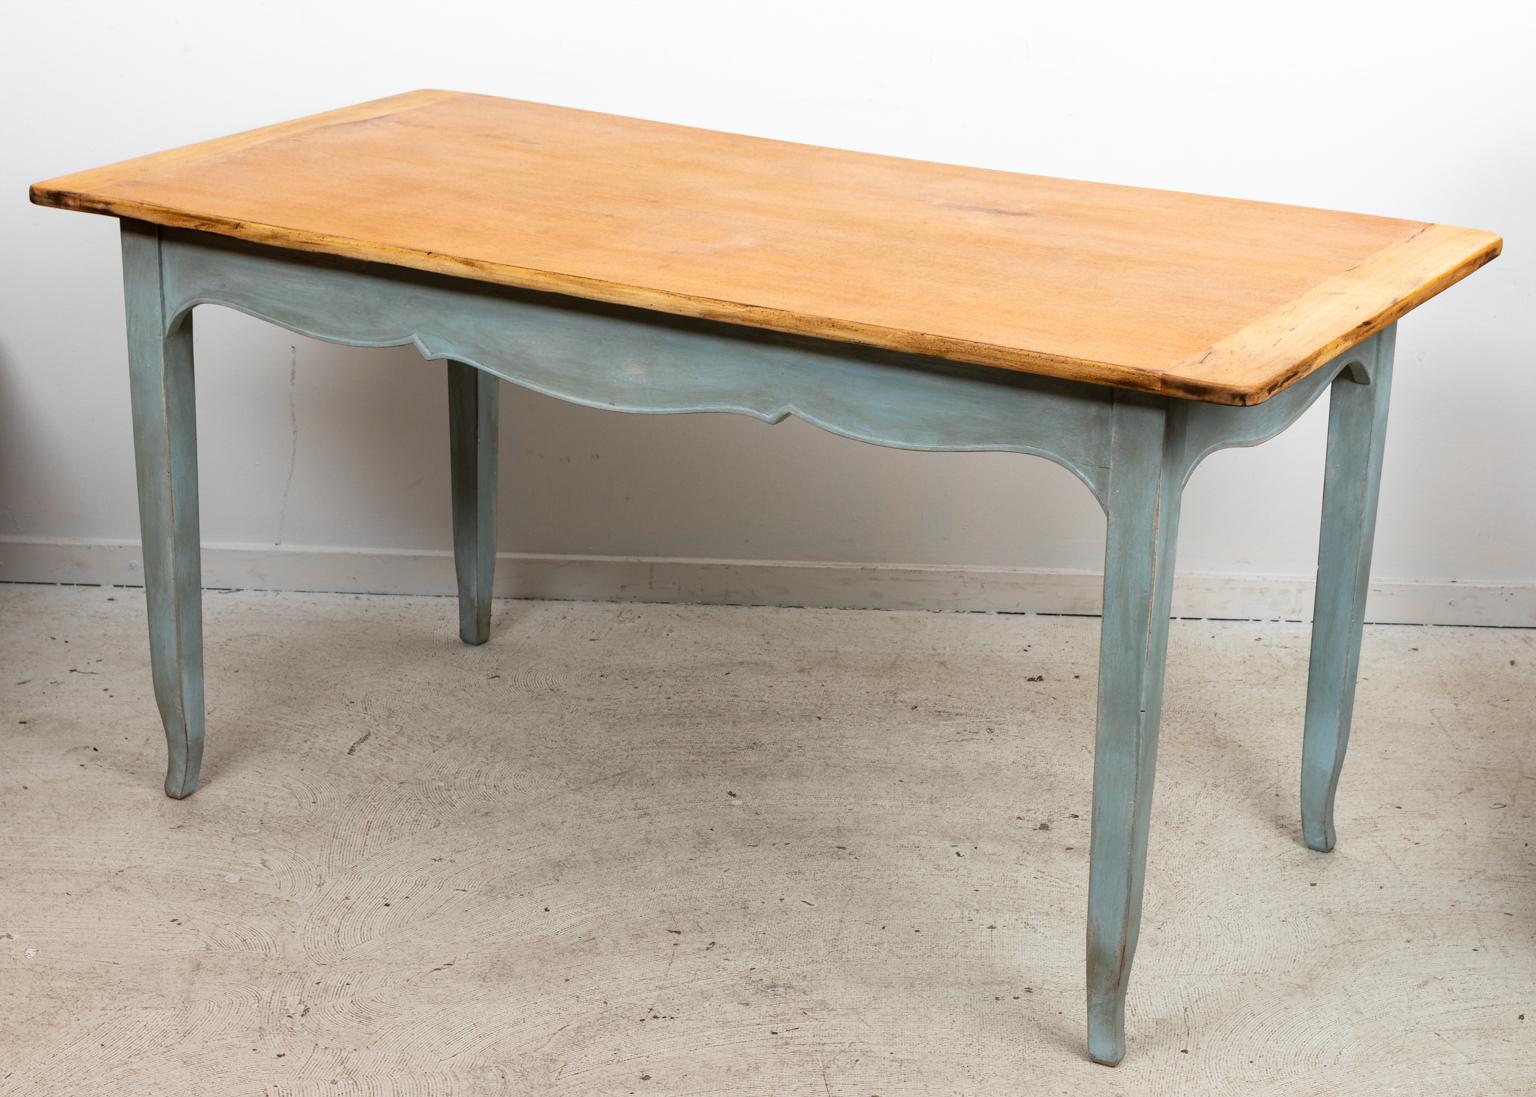 Circa 1940s Italian painted writing table or desk in the Italian Provincial style with three drawers on one side. The piece is painted in a light blue base with shaped apron and scallop trim molding. The top of the desk has been stripped revealing a